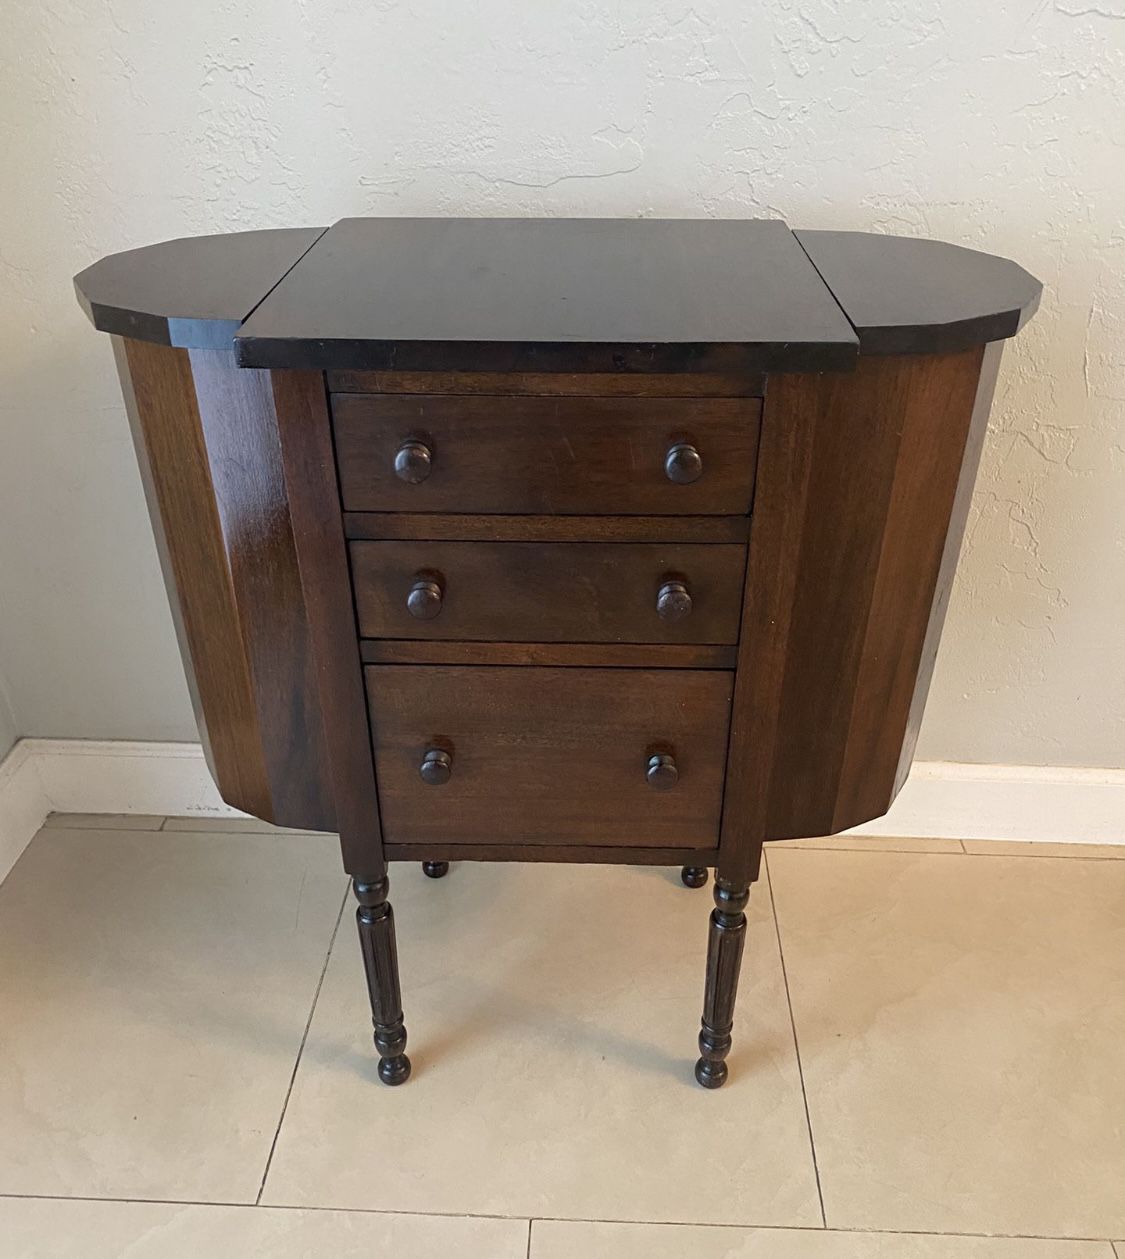 Antique Wood Sewing Table Accent Cabinet